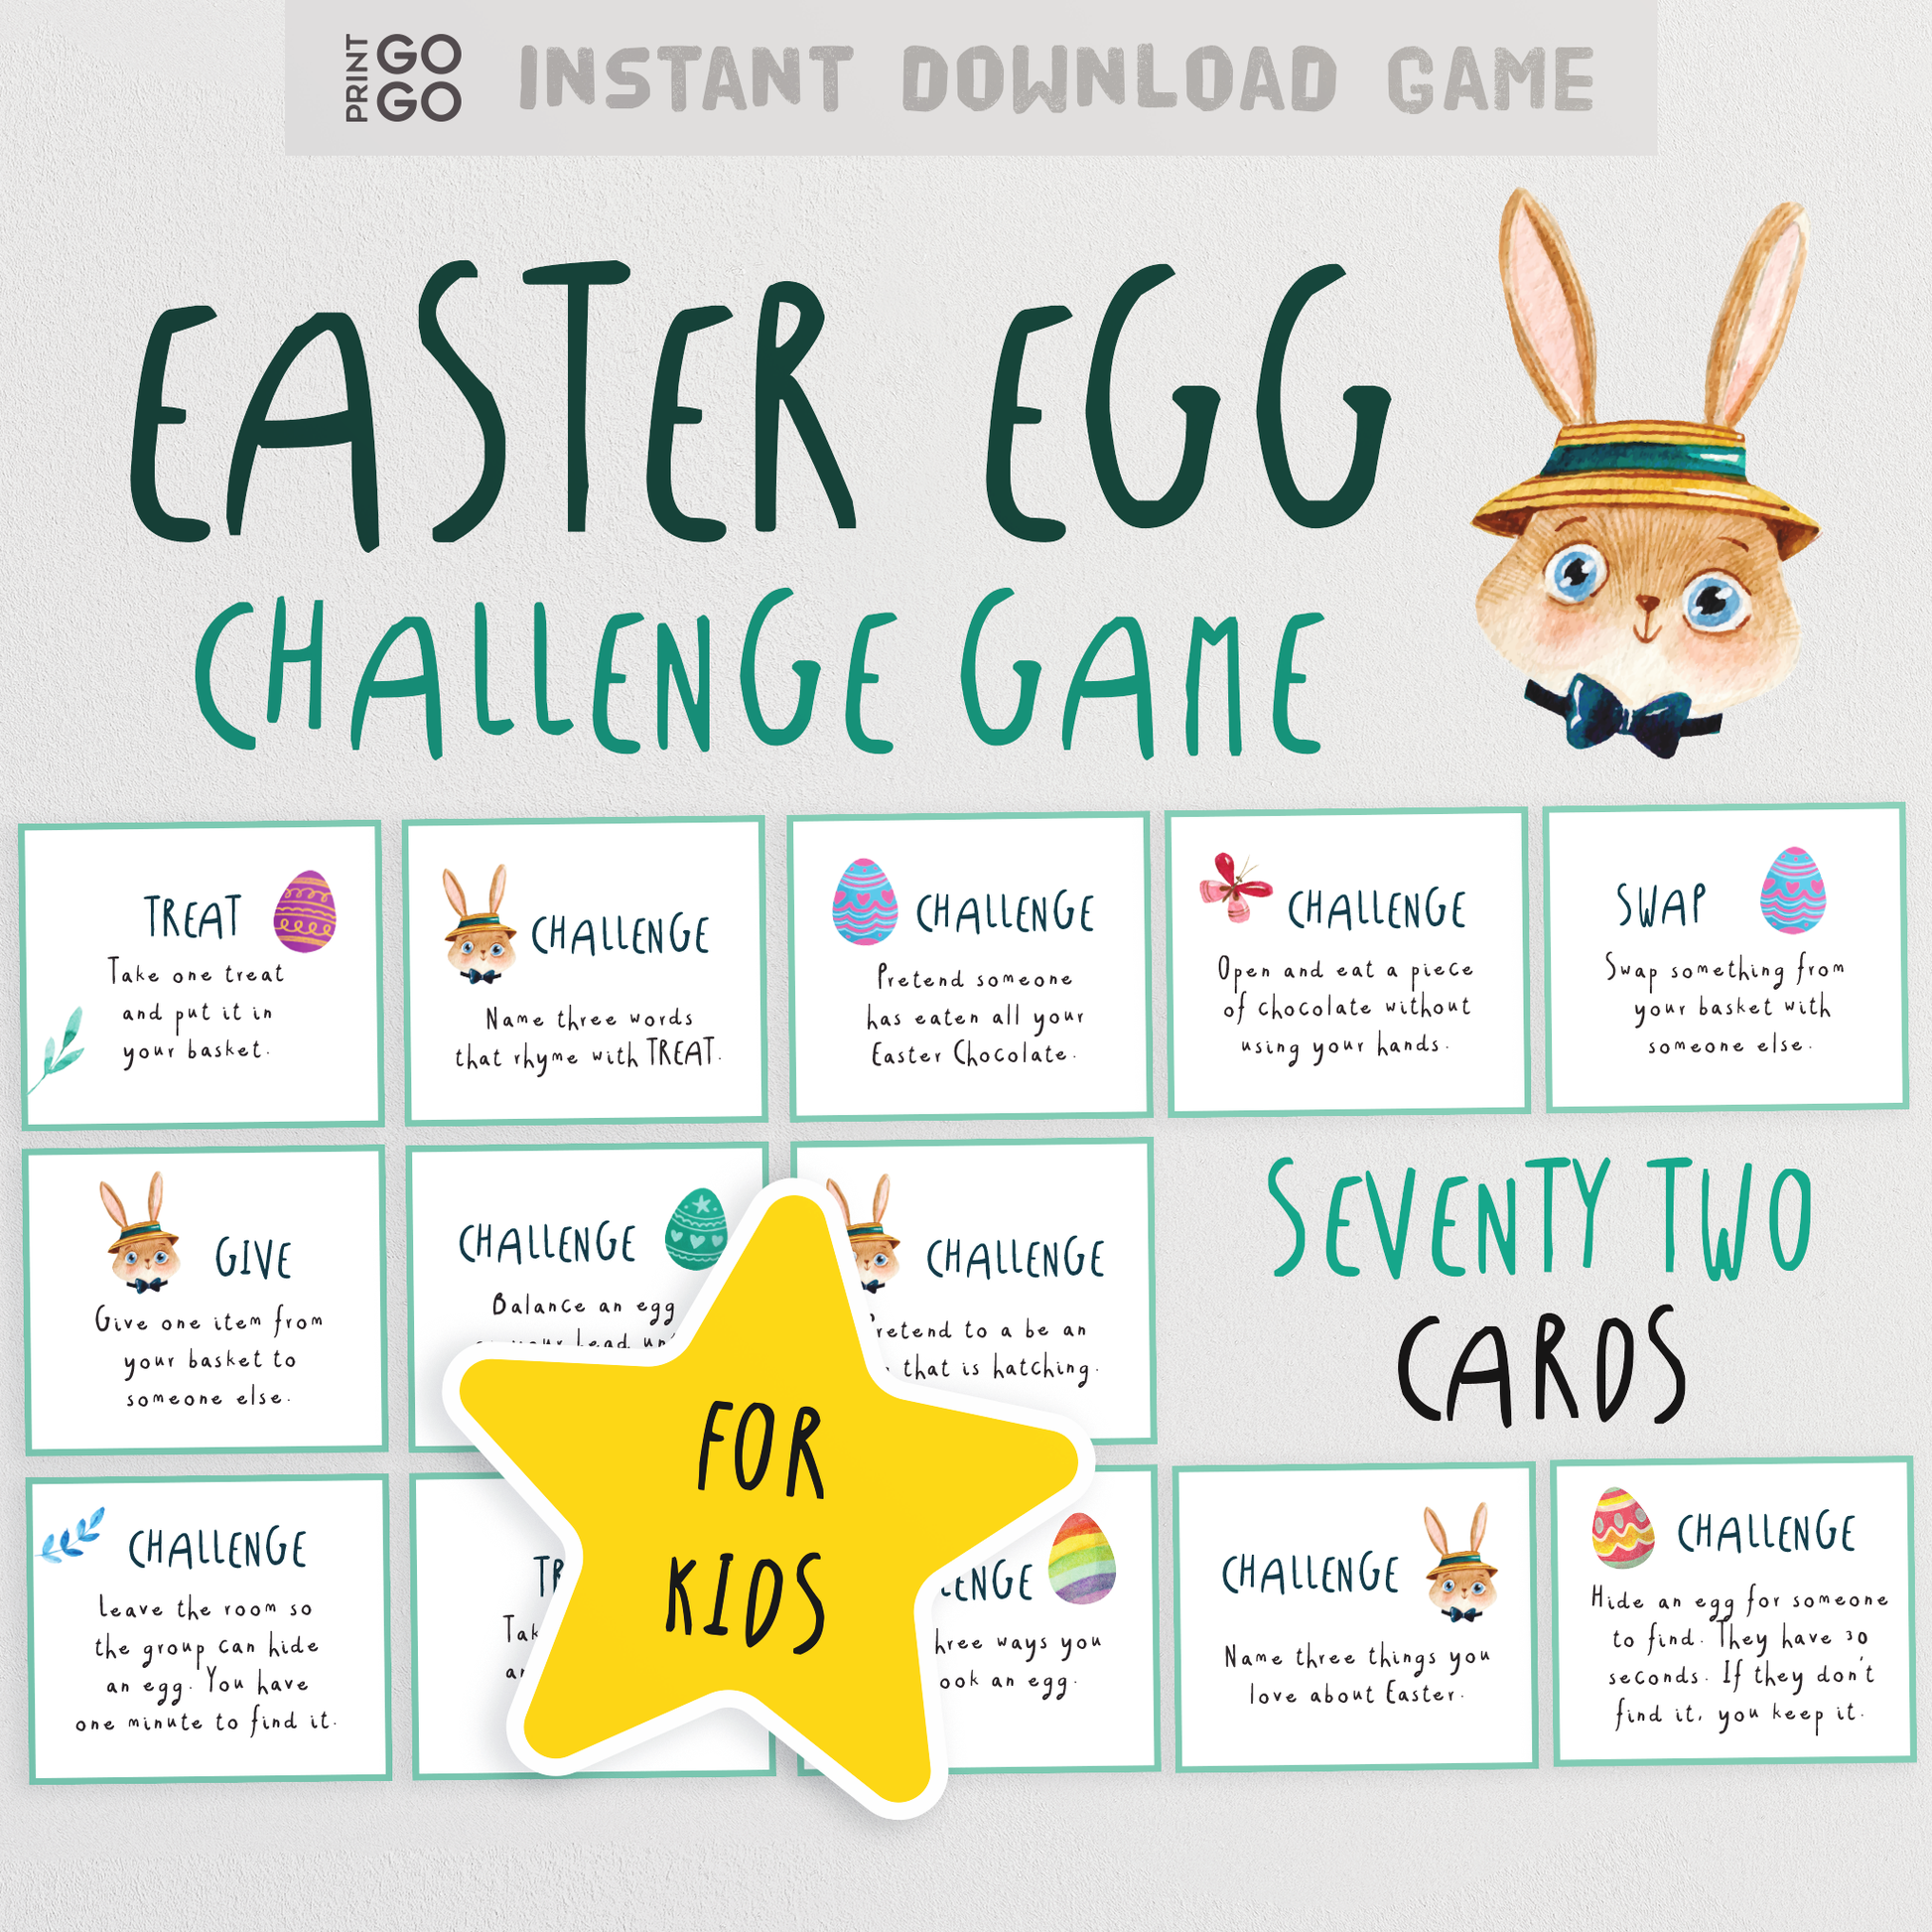 Easter Egg Challenge Game - The Egg-Stra Fun Candy Game for Families